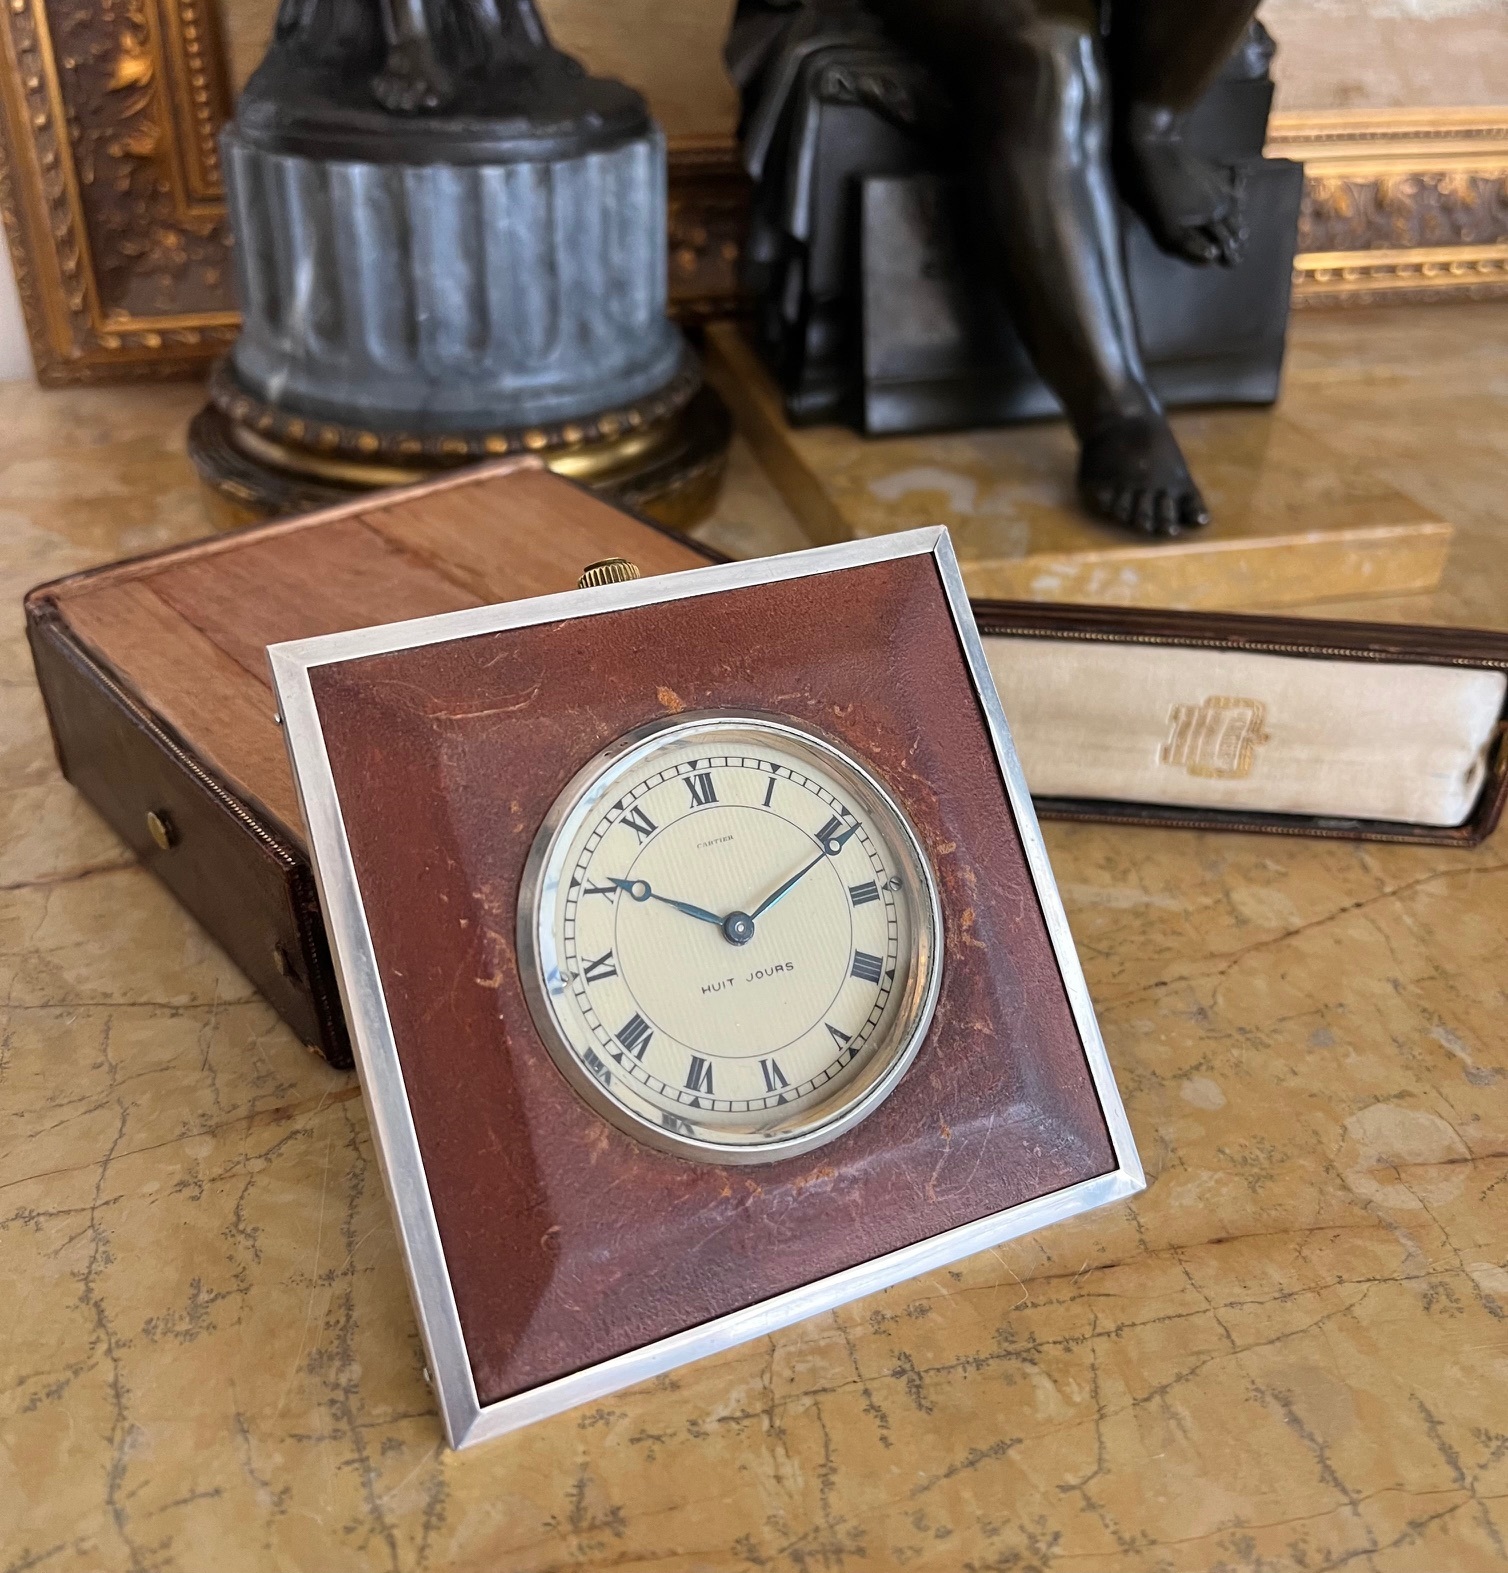 CARTIER: A 1930'S SILVER AND LEATHER TRAVELLING CLOCK IN ORIGINAL CASE - Image 4 of 6